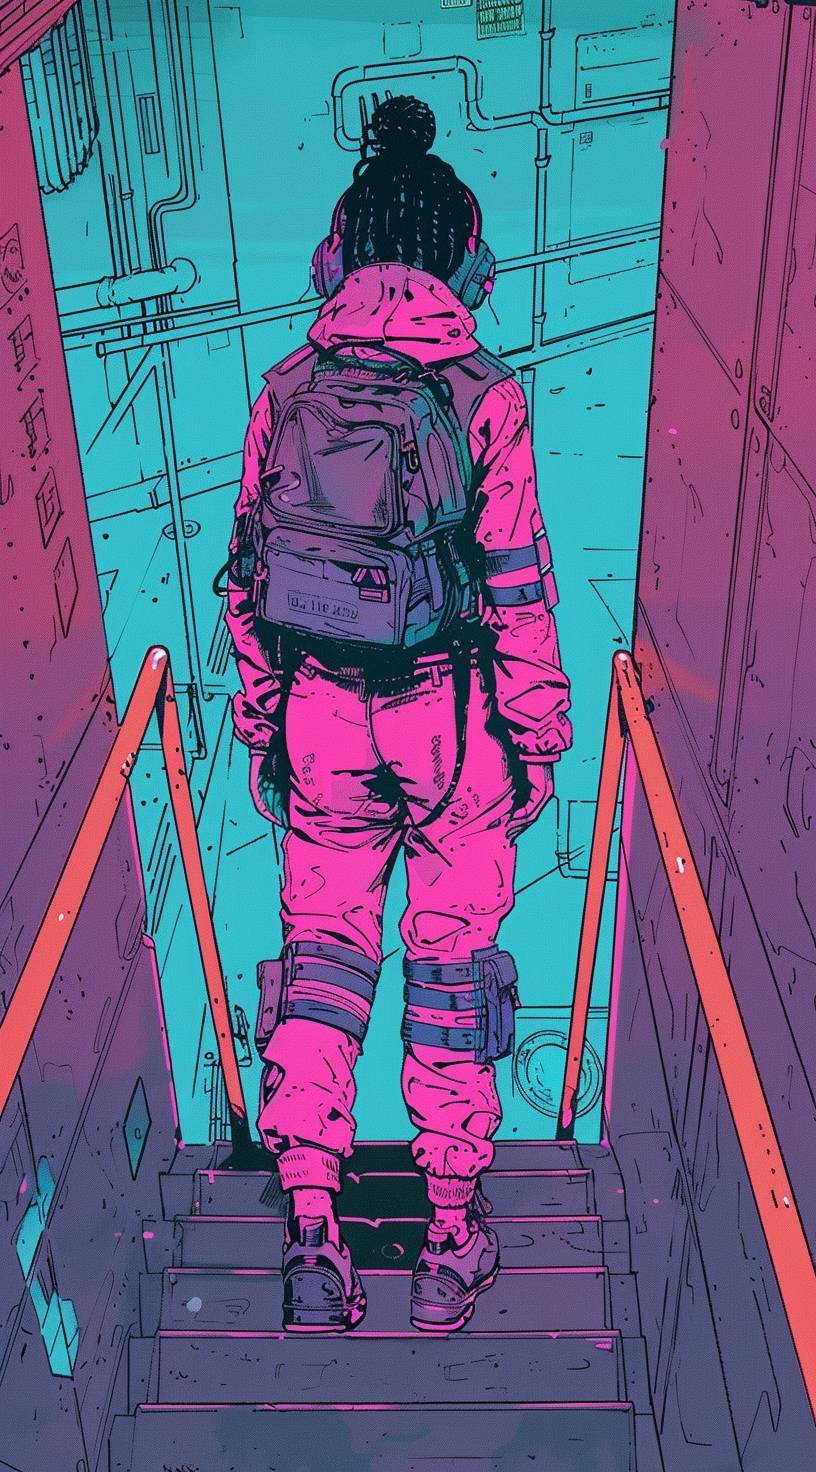 A lady in a colorful outfit reminiscent of cyberpunk manga, josan gonzalez's style, standing in the gangway. The outfit features sky-blue and pink colors, creating a strong sense of realism. The artwork incorporates the theme of transportcore and includes meticulously crafted blink-and-you-miss-it details. It follows a vaporpunk style. --ar 71:128  --v 6.0